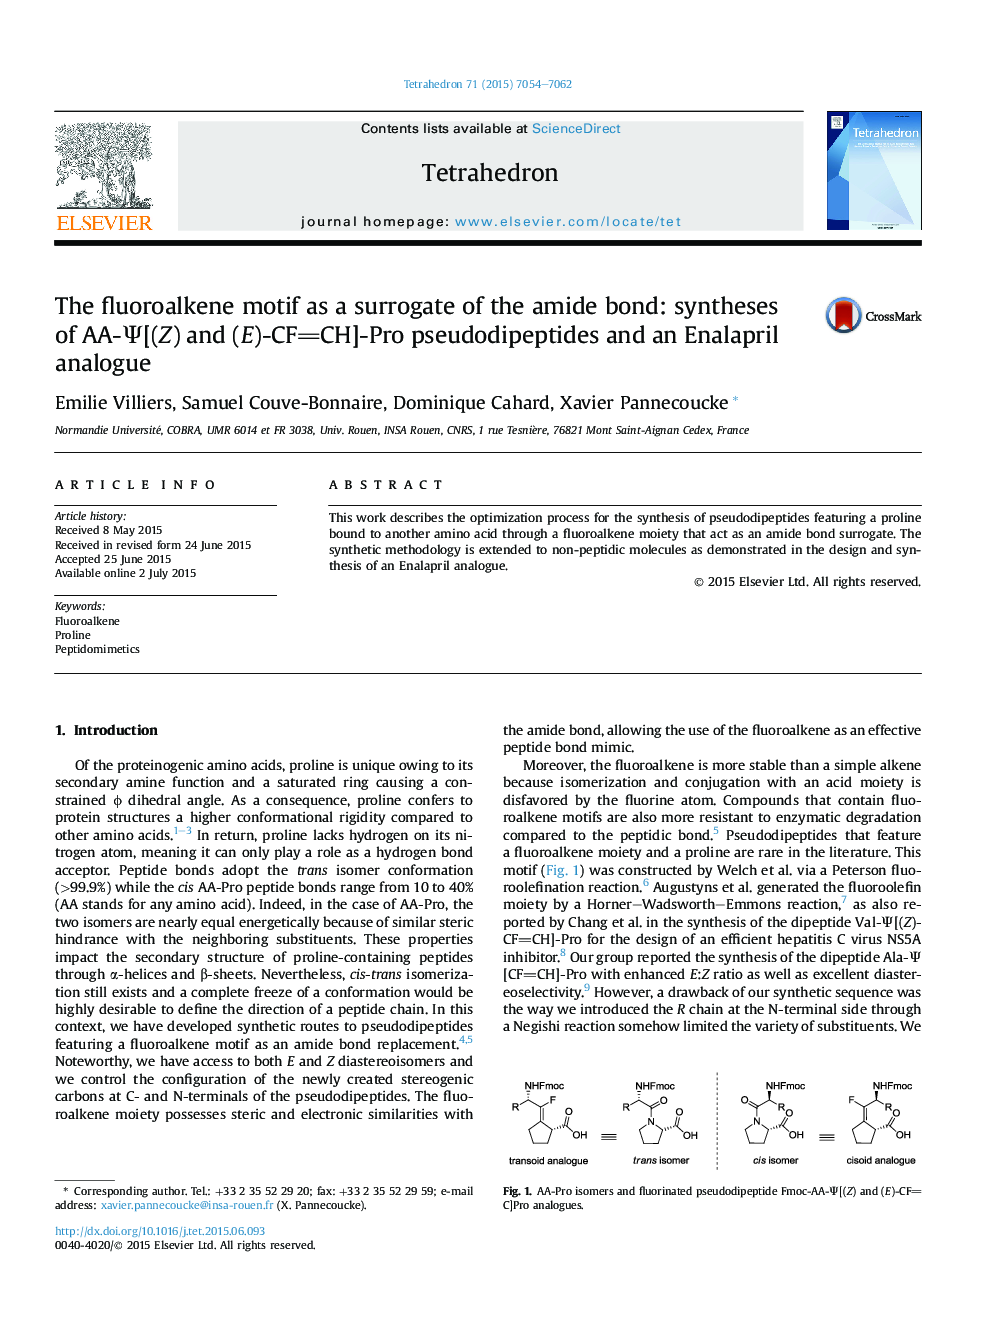 The fluoroalkene motif as a surrogate of the amide bond: syntheses of AA-Î¨[(Z) and (E)-CFCH]-Pro pseudodipeptides and an Enalapril analogue